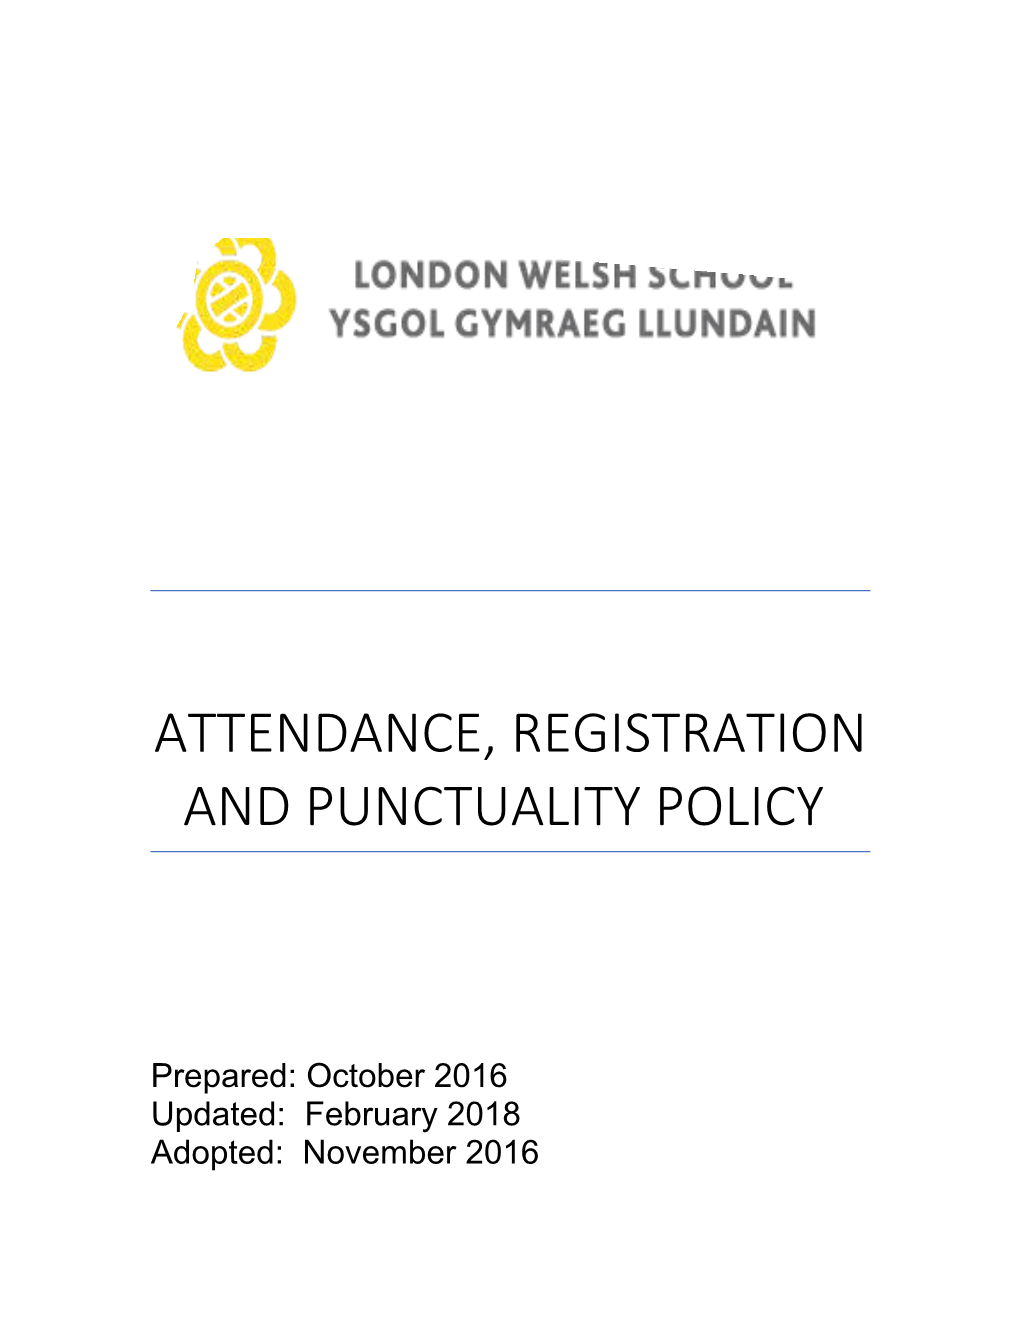 ATTENDANCE, REGISTRATION and PUNCTUALITY Policy